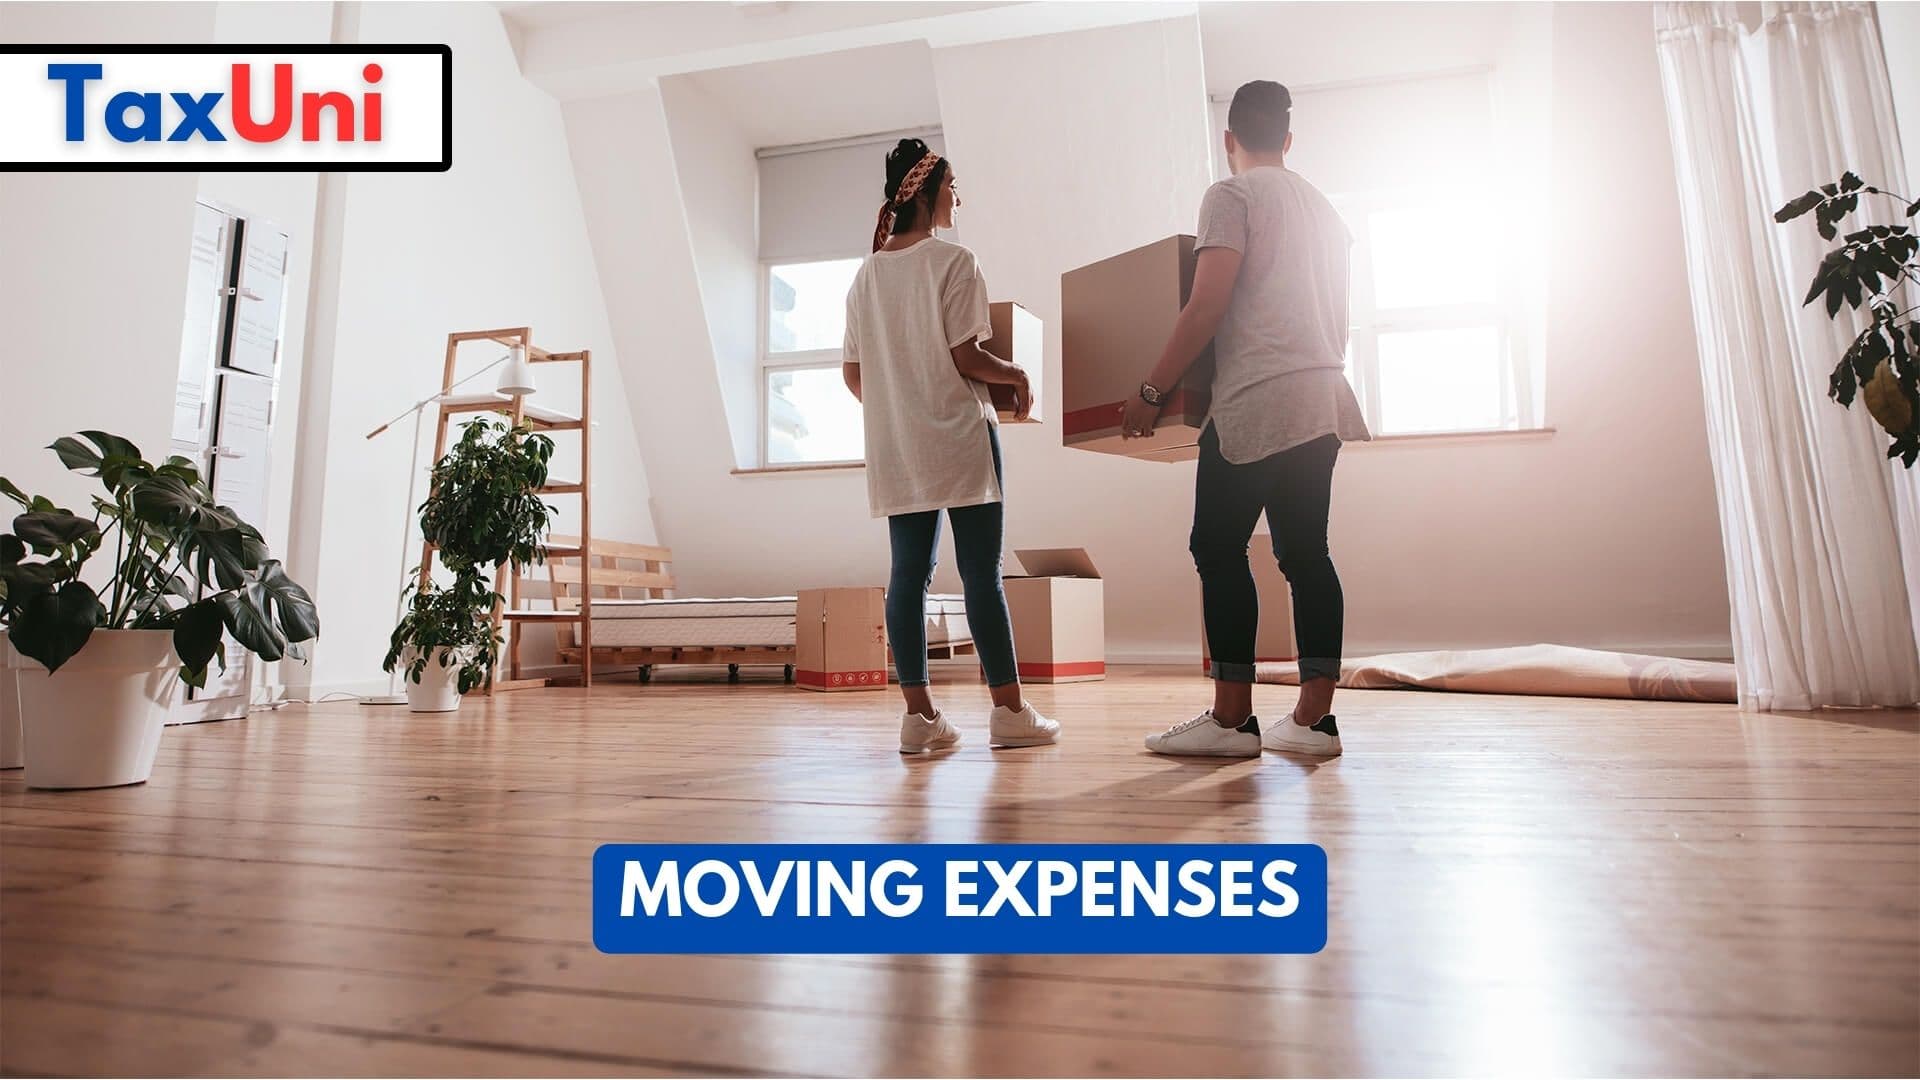 Moving Expenses